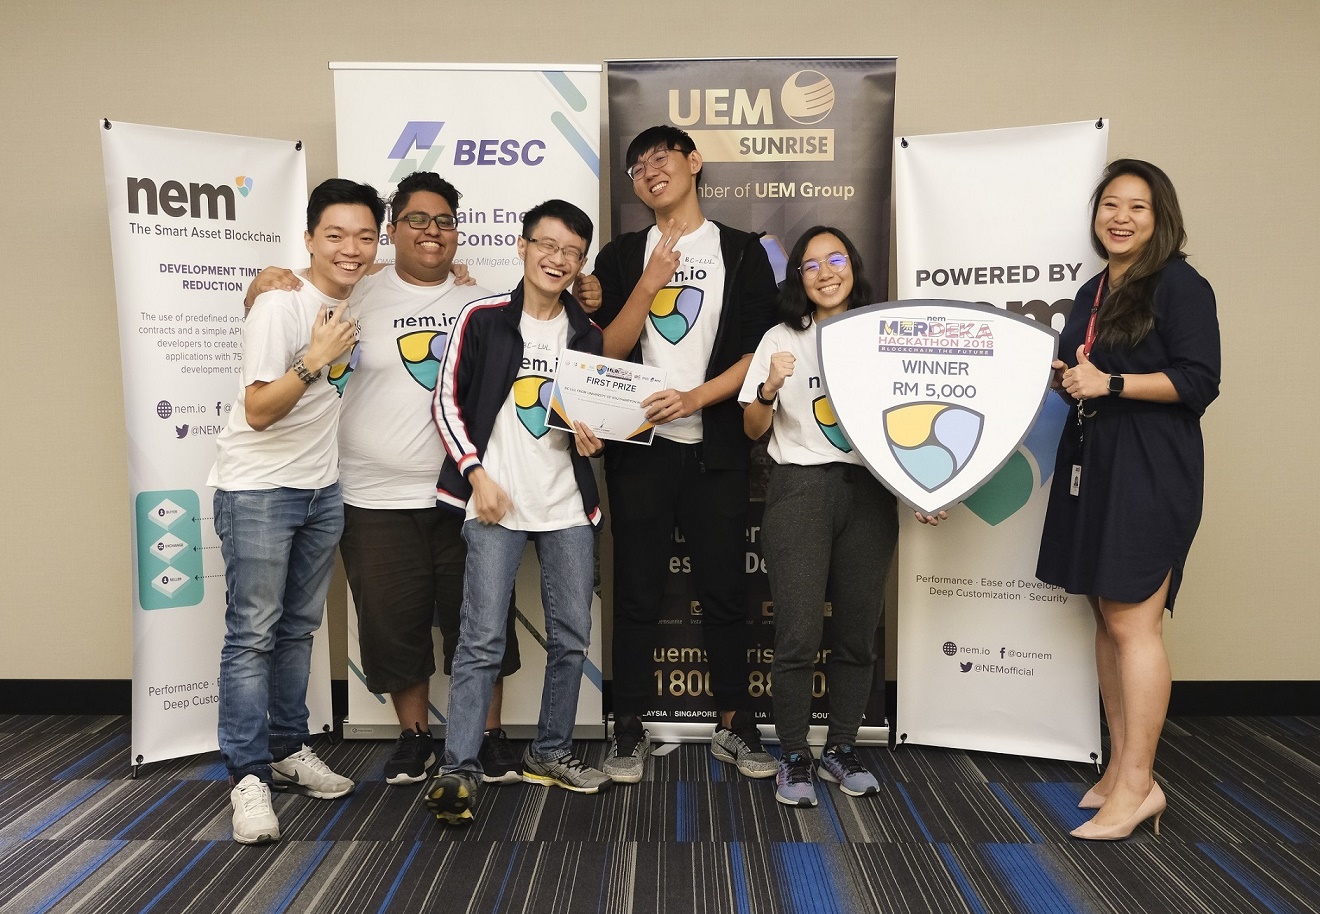 First prize winner of NEM Merdeka Hackathon 2018: Team BC-LUL from University of Southampton Malaysia, with (far right) UEM Sunrise Managing Director’s Office deputy senior manager Feng Wai Chia